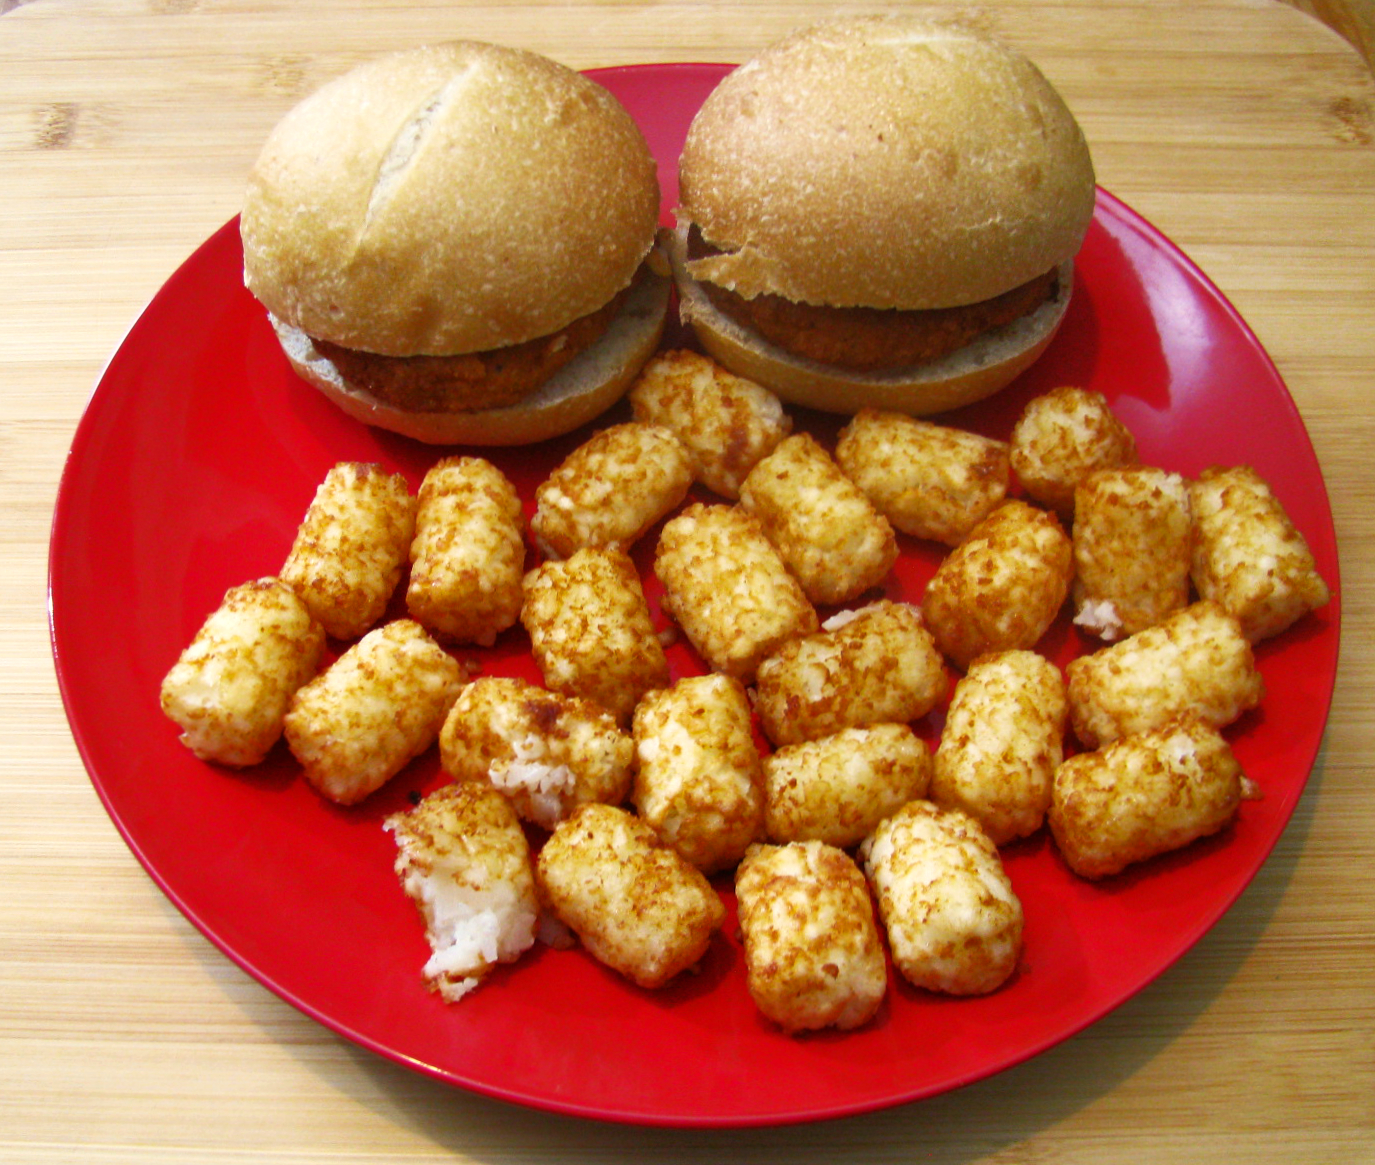 Breaded Chicken Sandwiches with Tater Tots